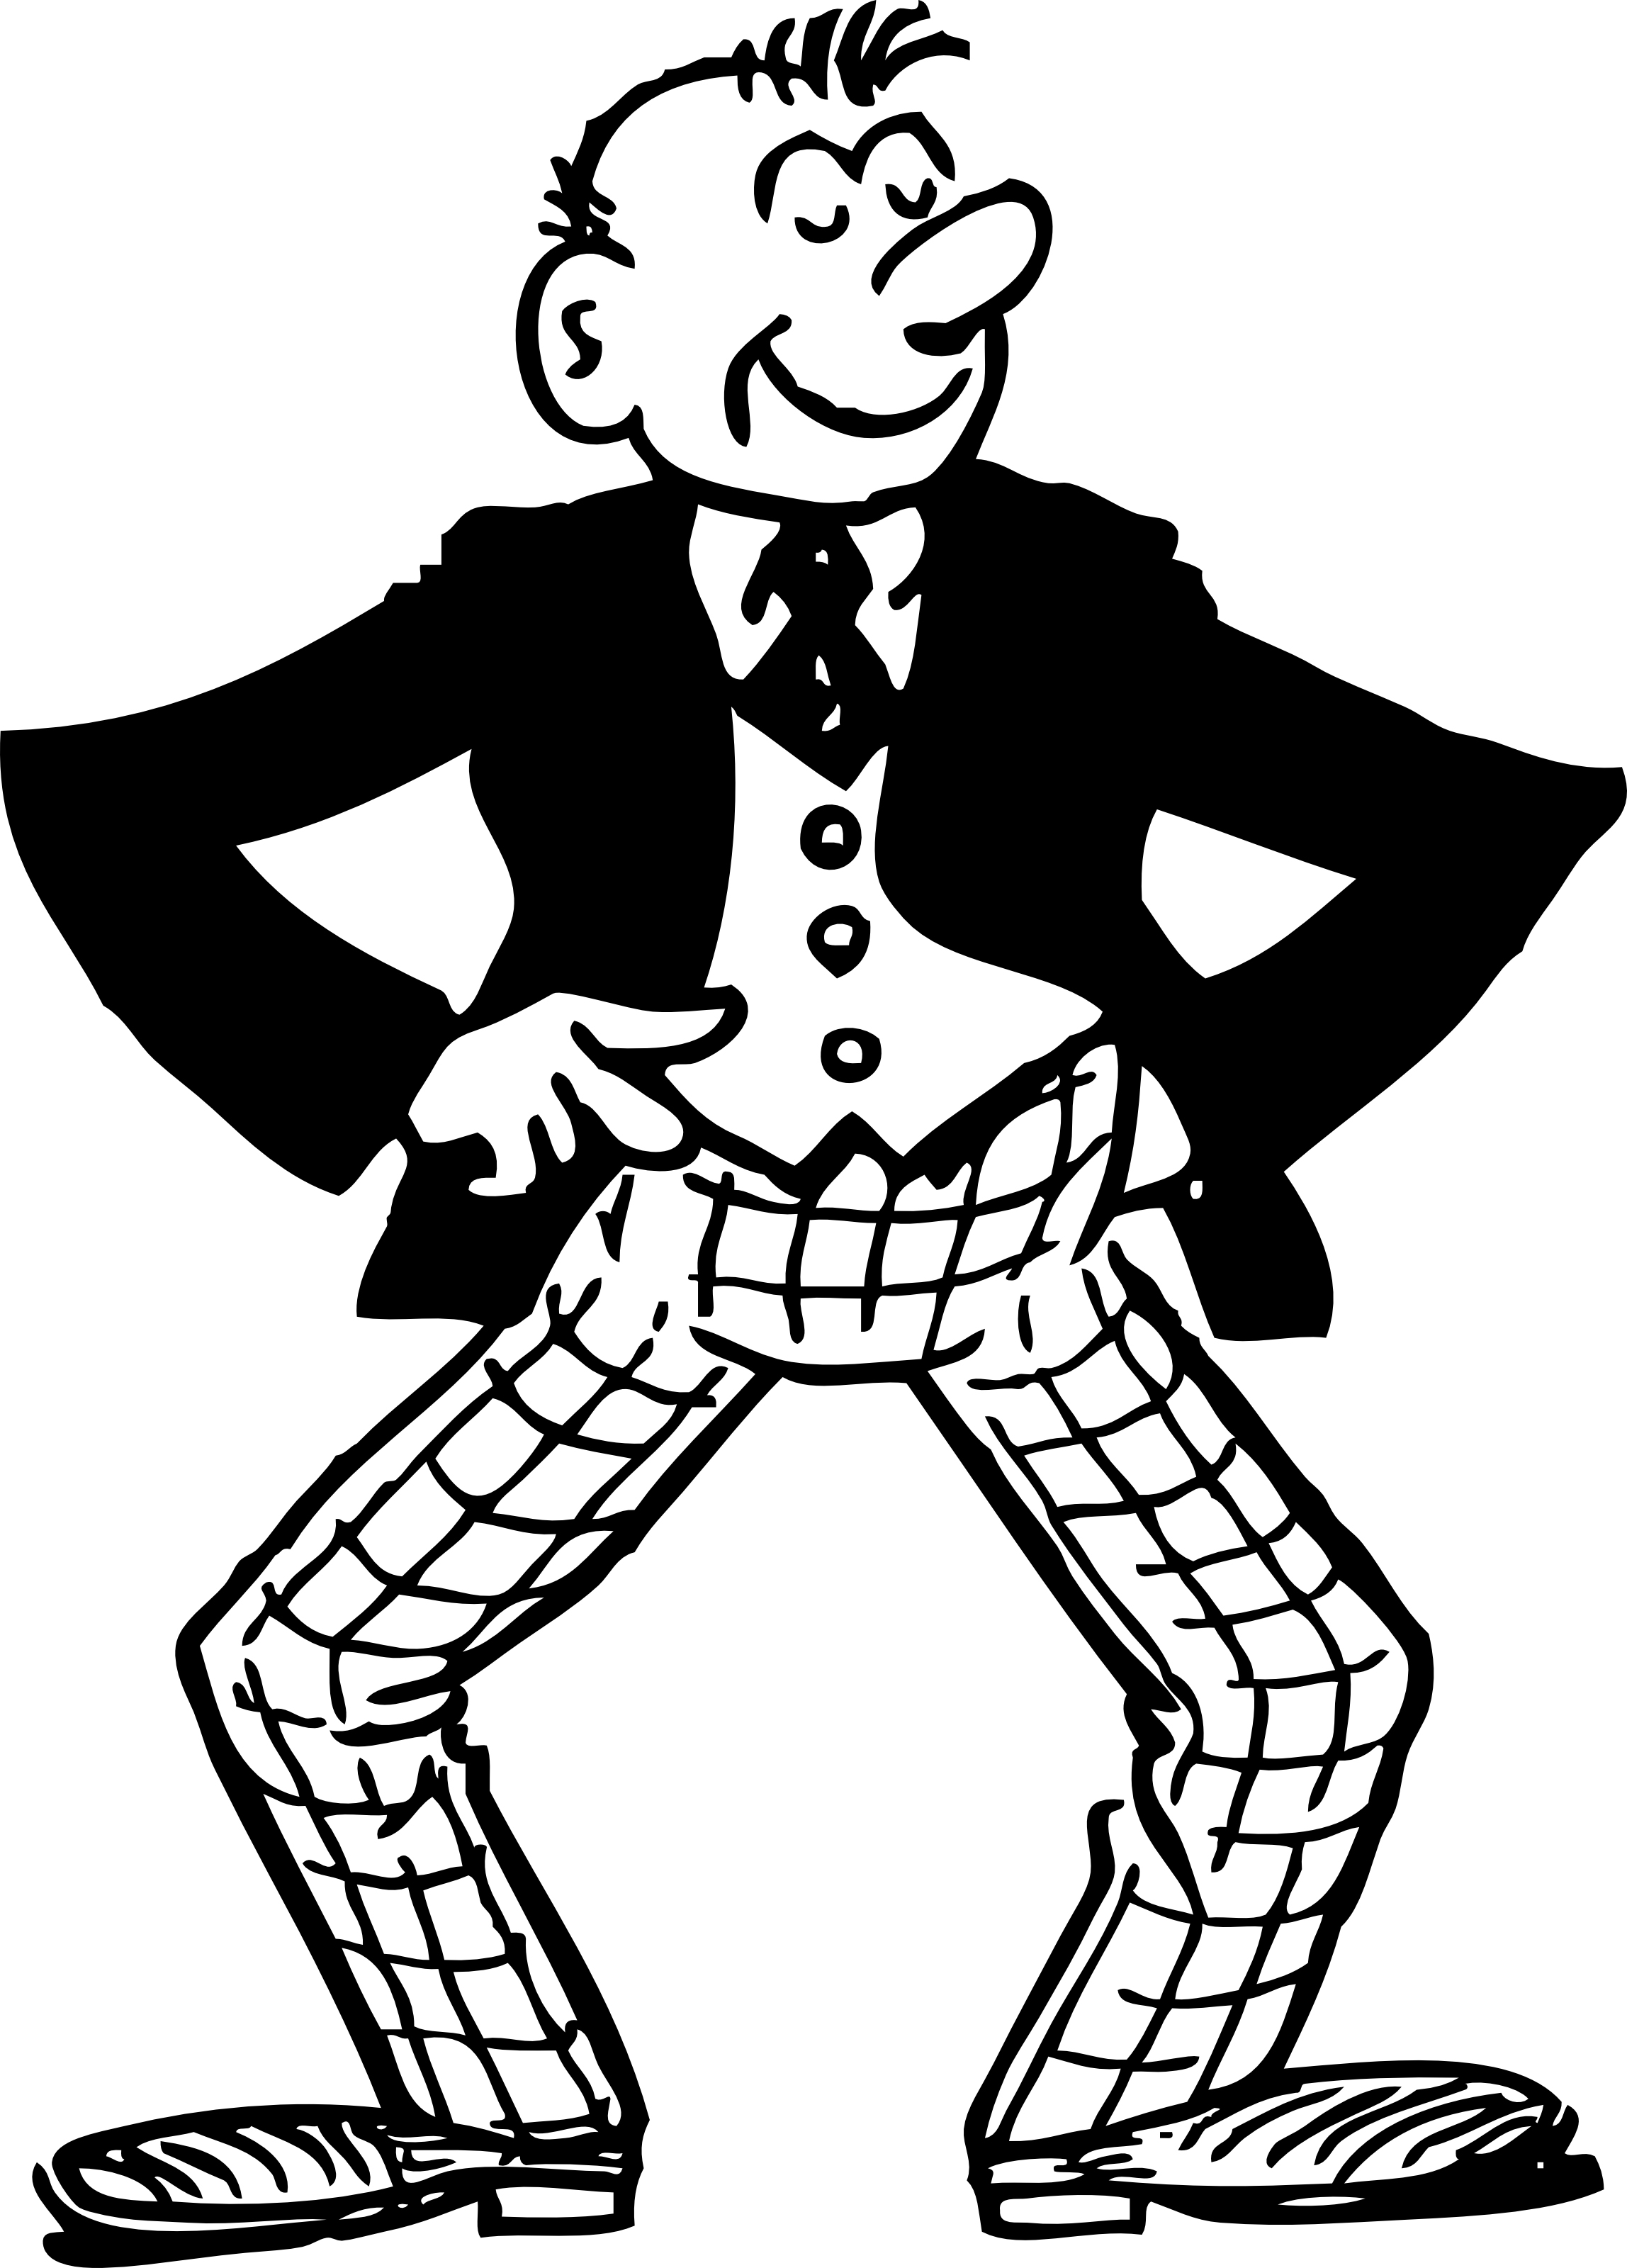 73-Free-Clipart-Illustration-Of-A-Cartoon-Retro-Man-Confidently-Waiting-With-A-Grin.jpg